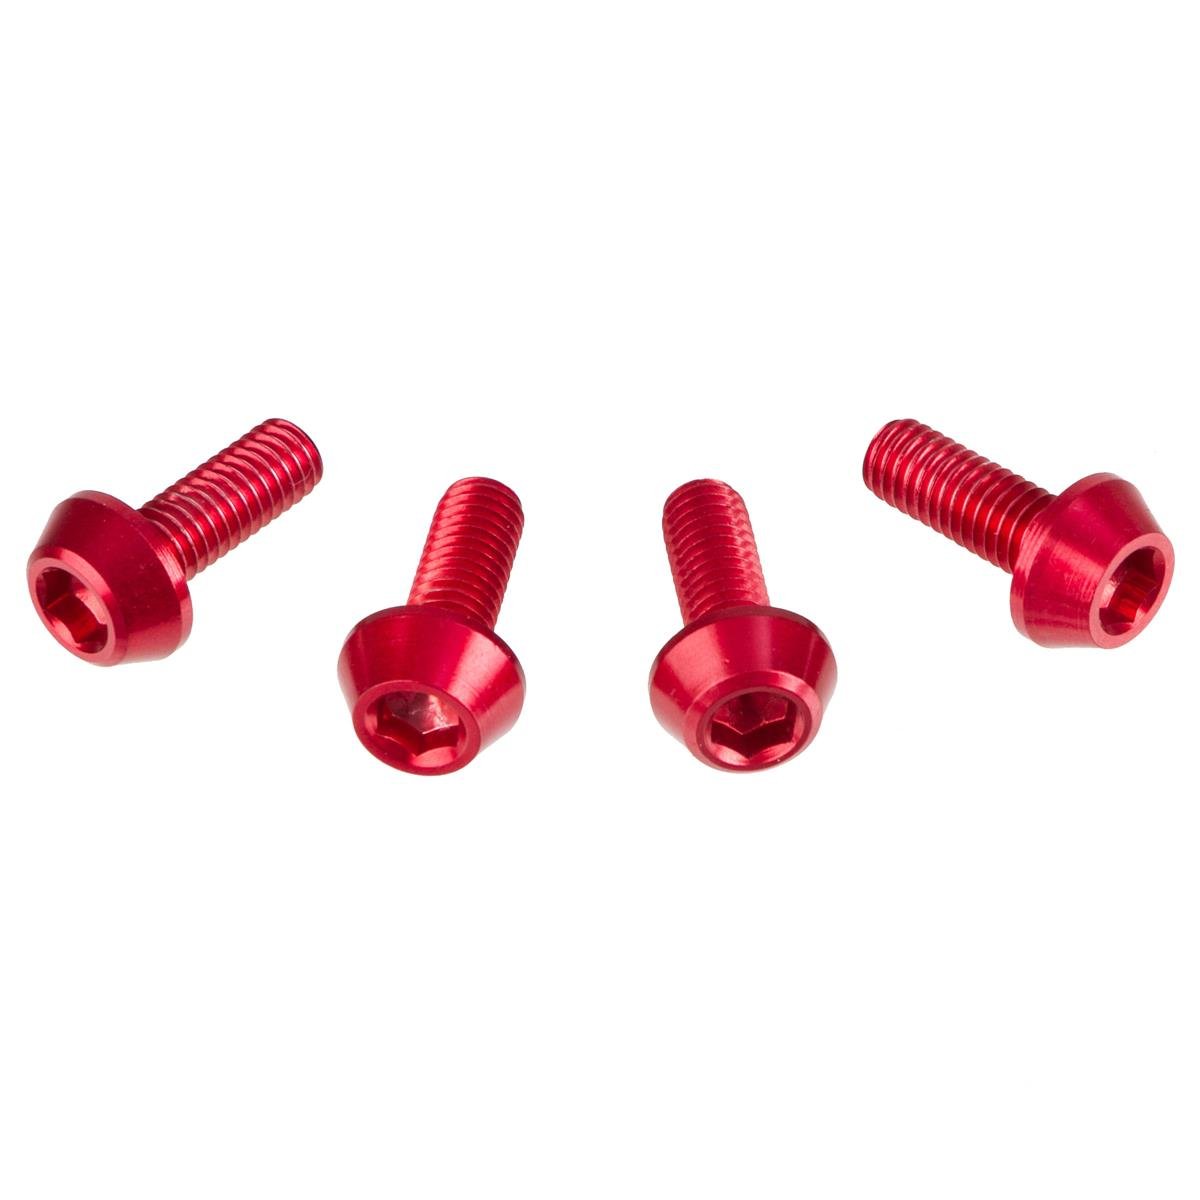 DRC Inner Hex Bolts  M6 x 16 mm, Red, Pack of 4